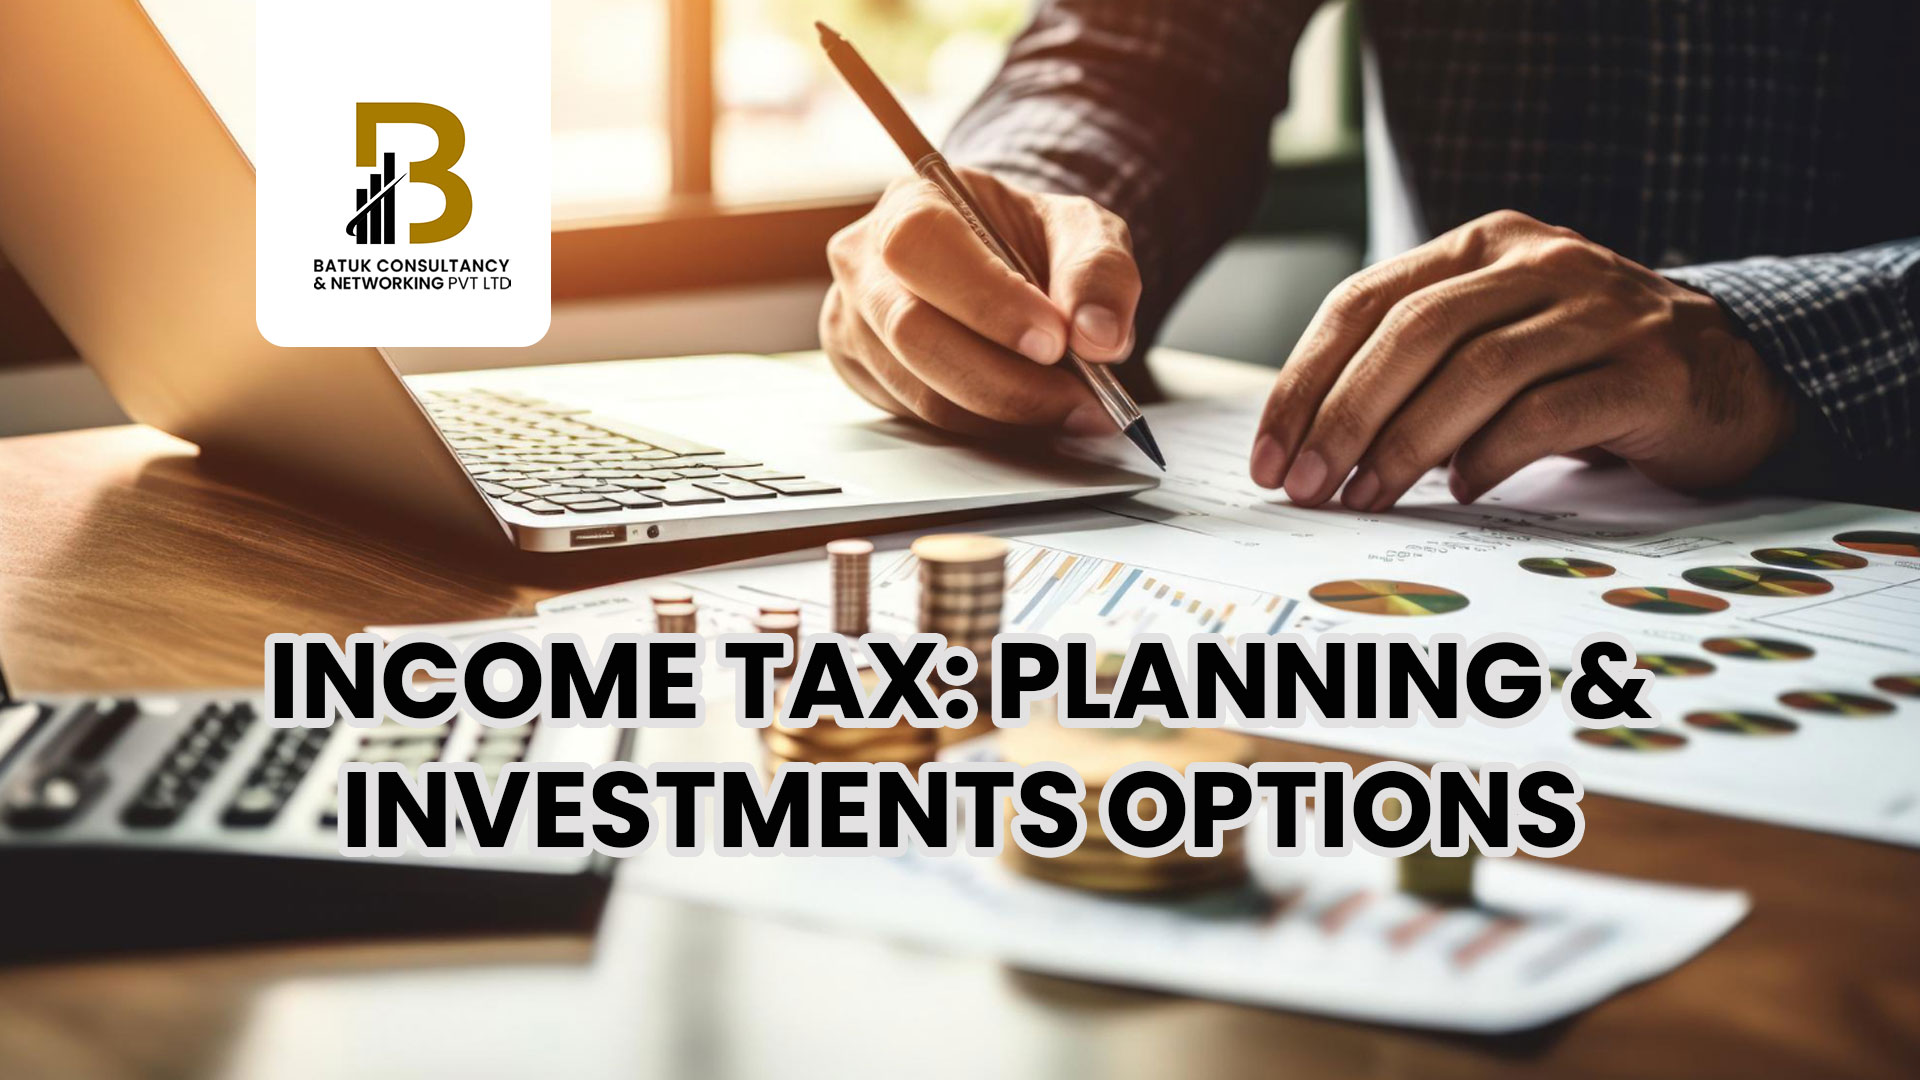 INCOME TAX PLANNING & INVESTMENTS OPTIONS